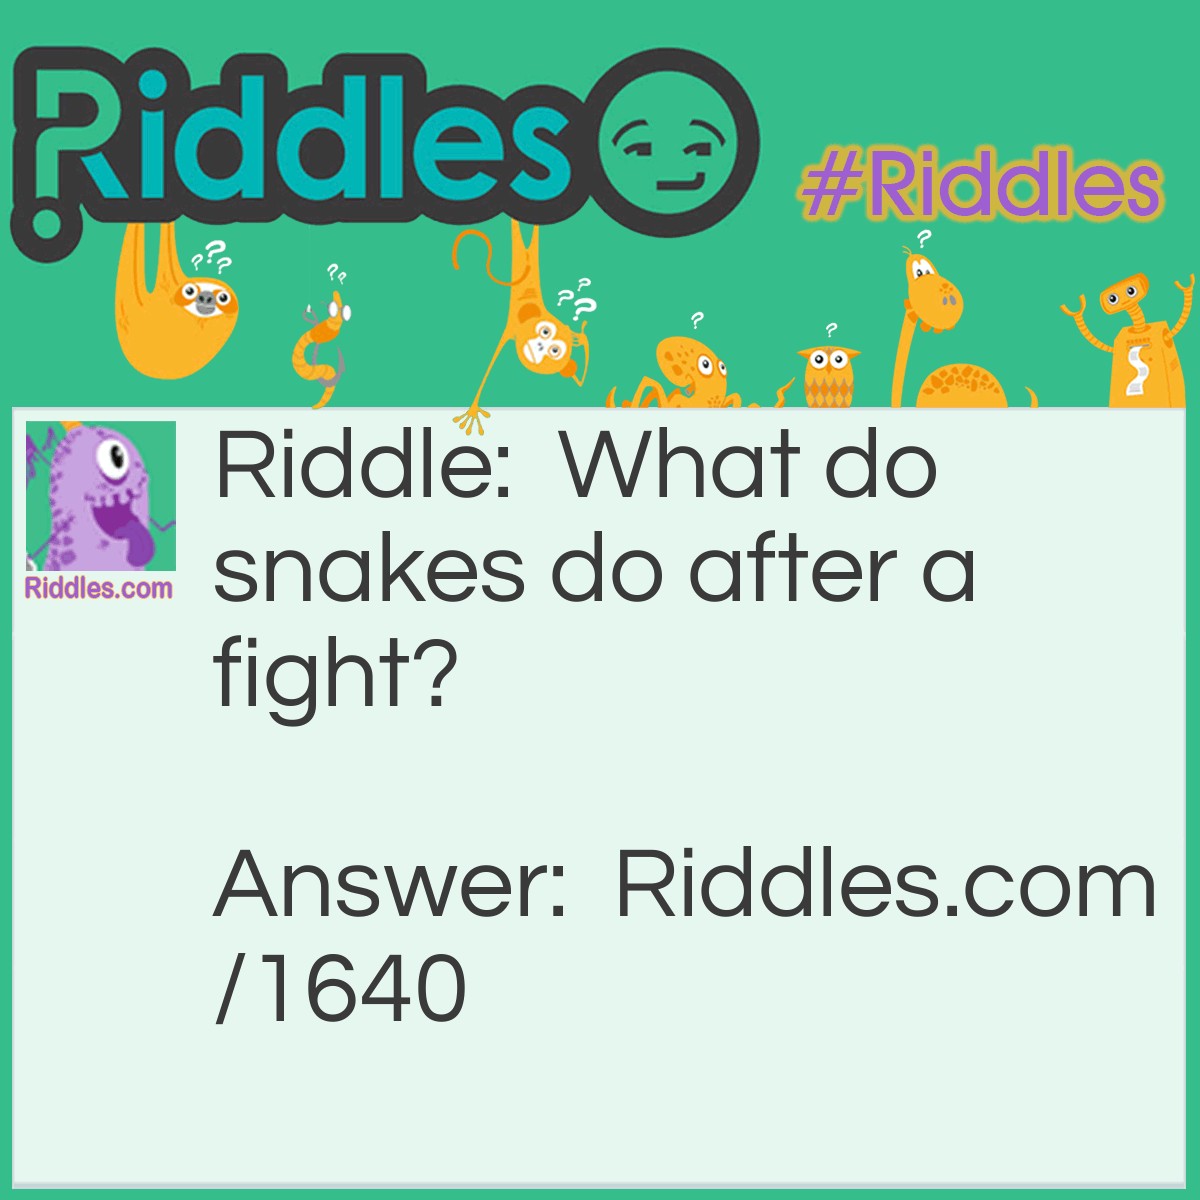 Riddle: What do snakes do after a fight? Answer: They hiss and make up!